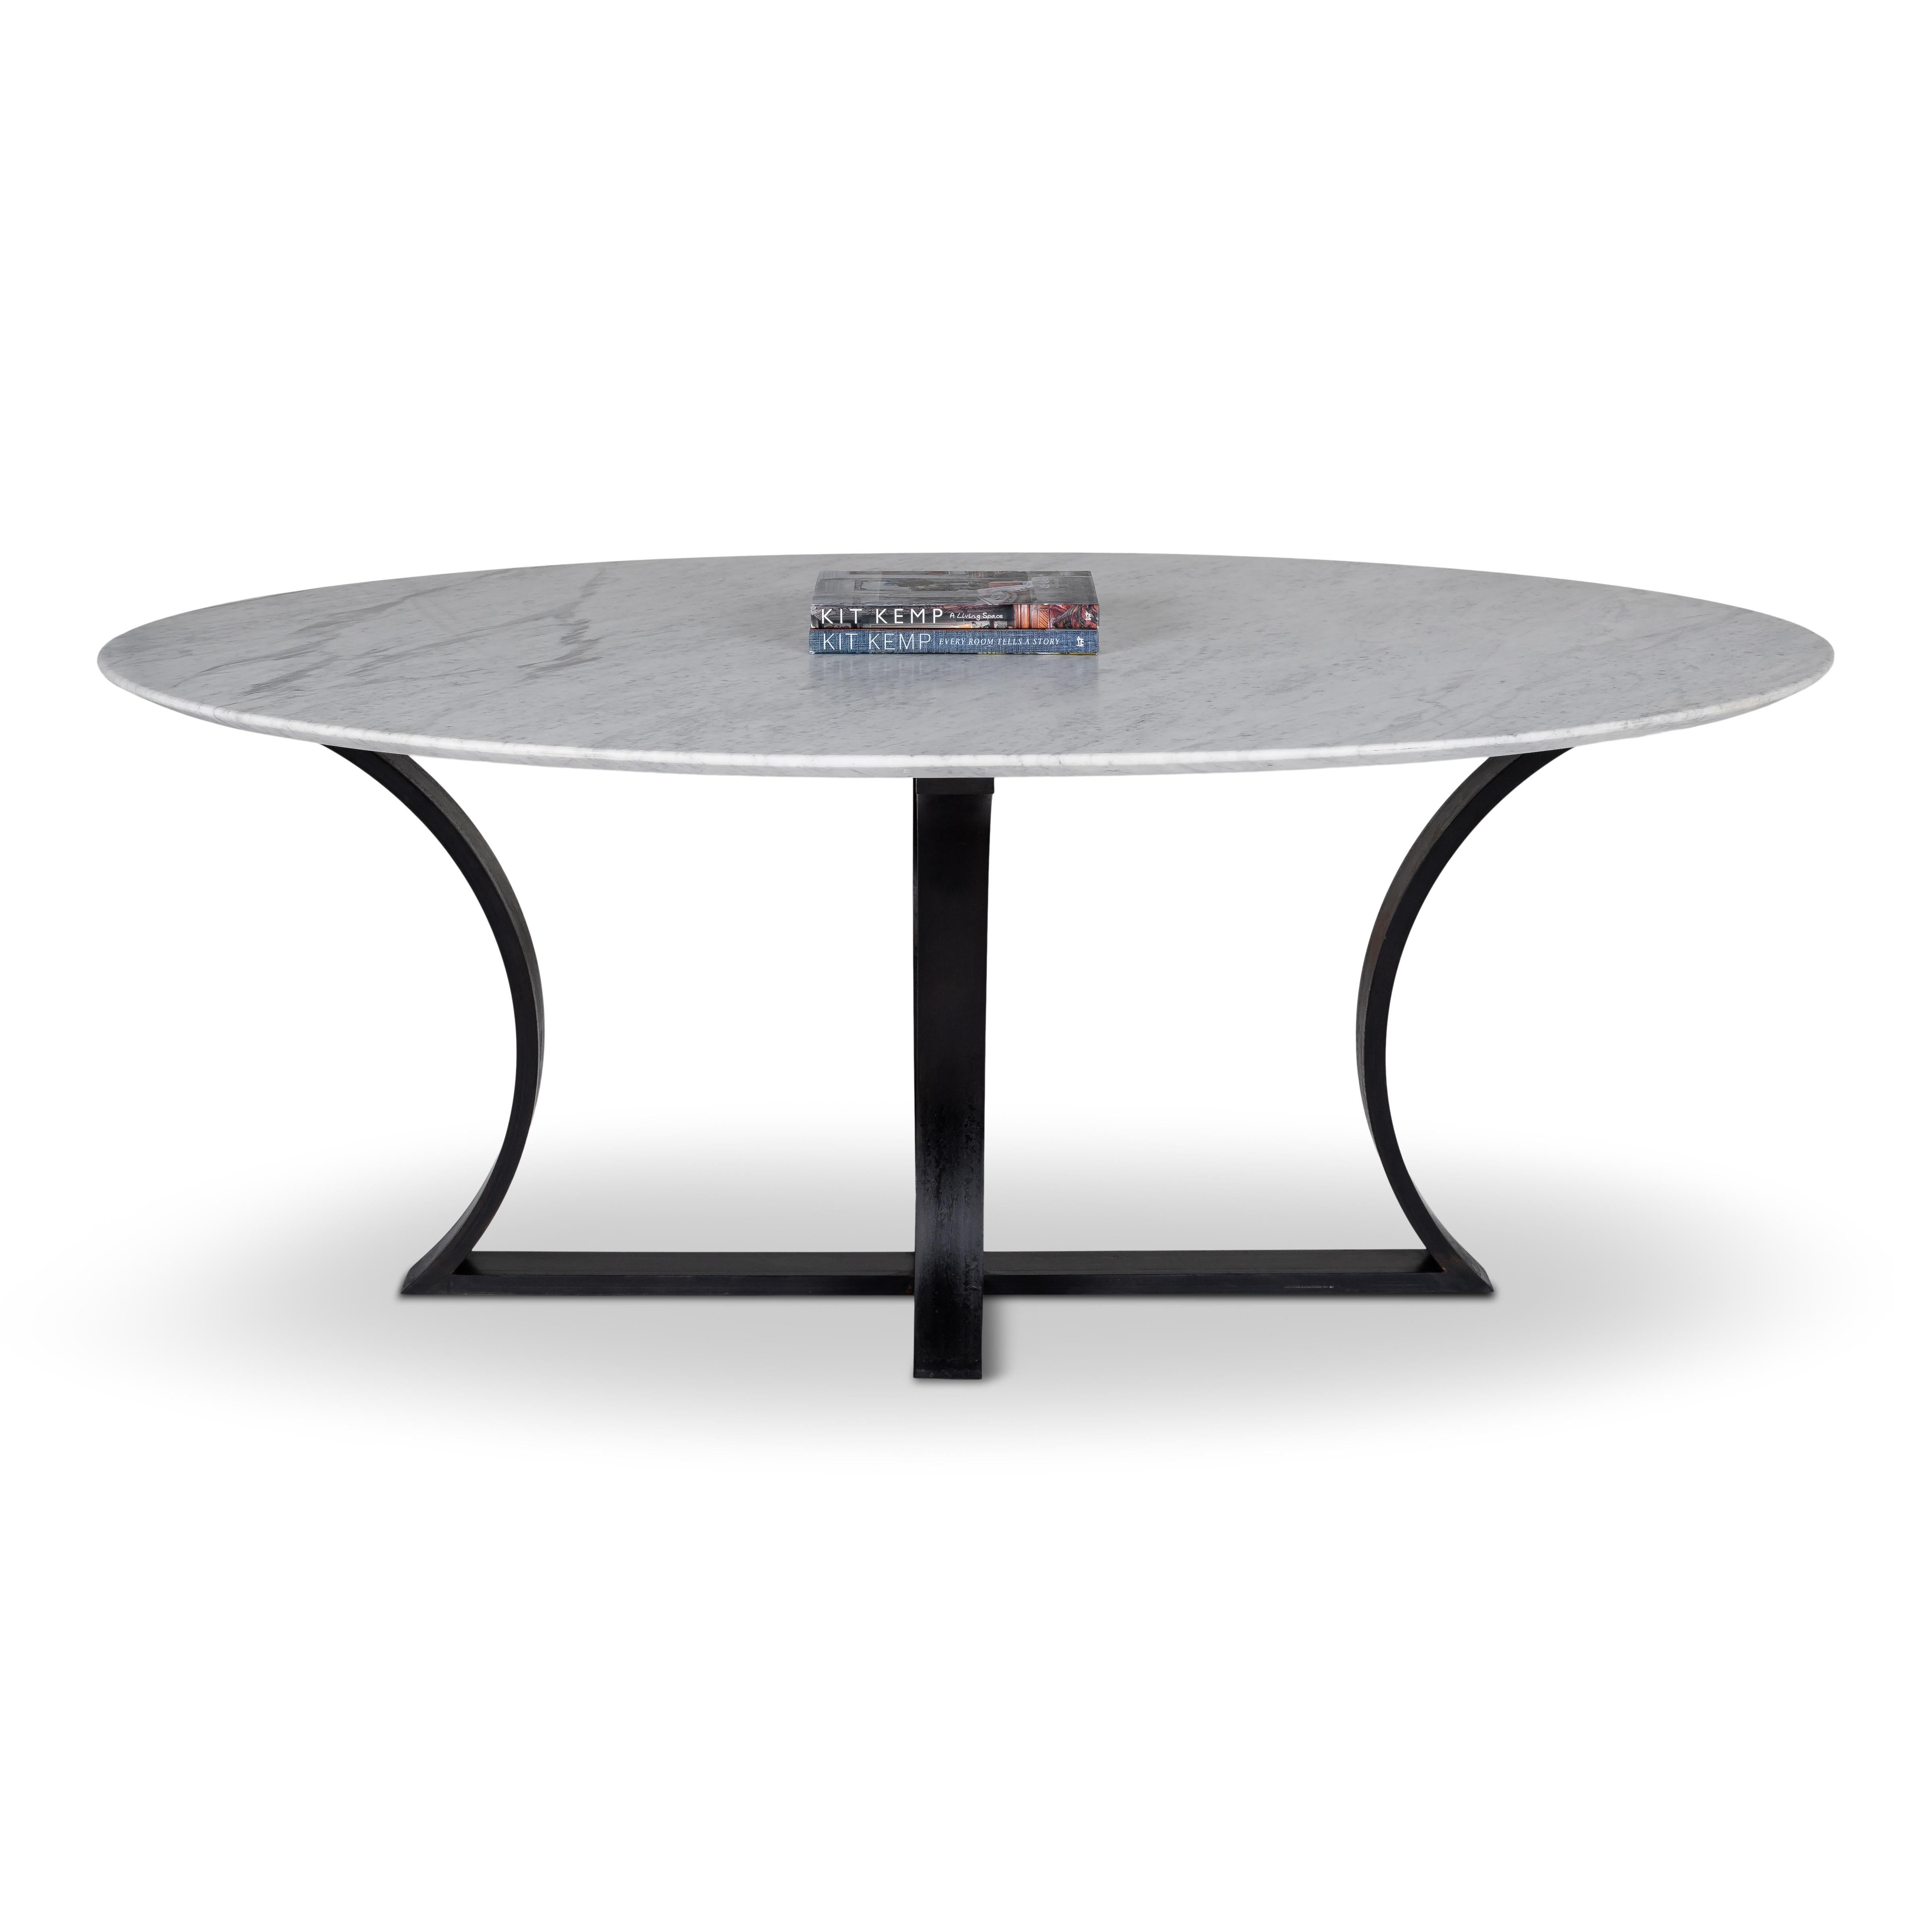 Honed carrera marble dining table on ebonized metal base.

This item is crafted from natural materials. Coloring and detailing may vary, adding to its uniqueness.

Designed by Brendan Bass for the Vision and Design Collection, by using high quality